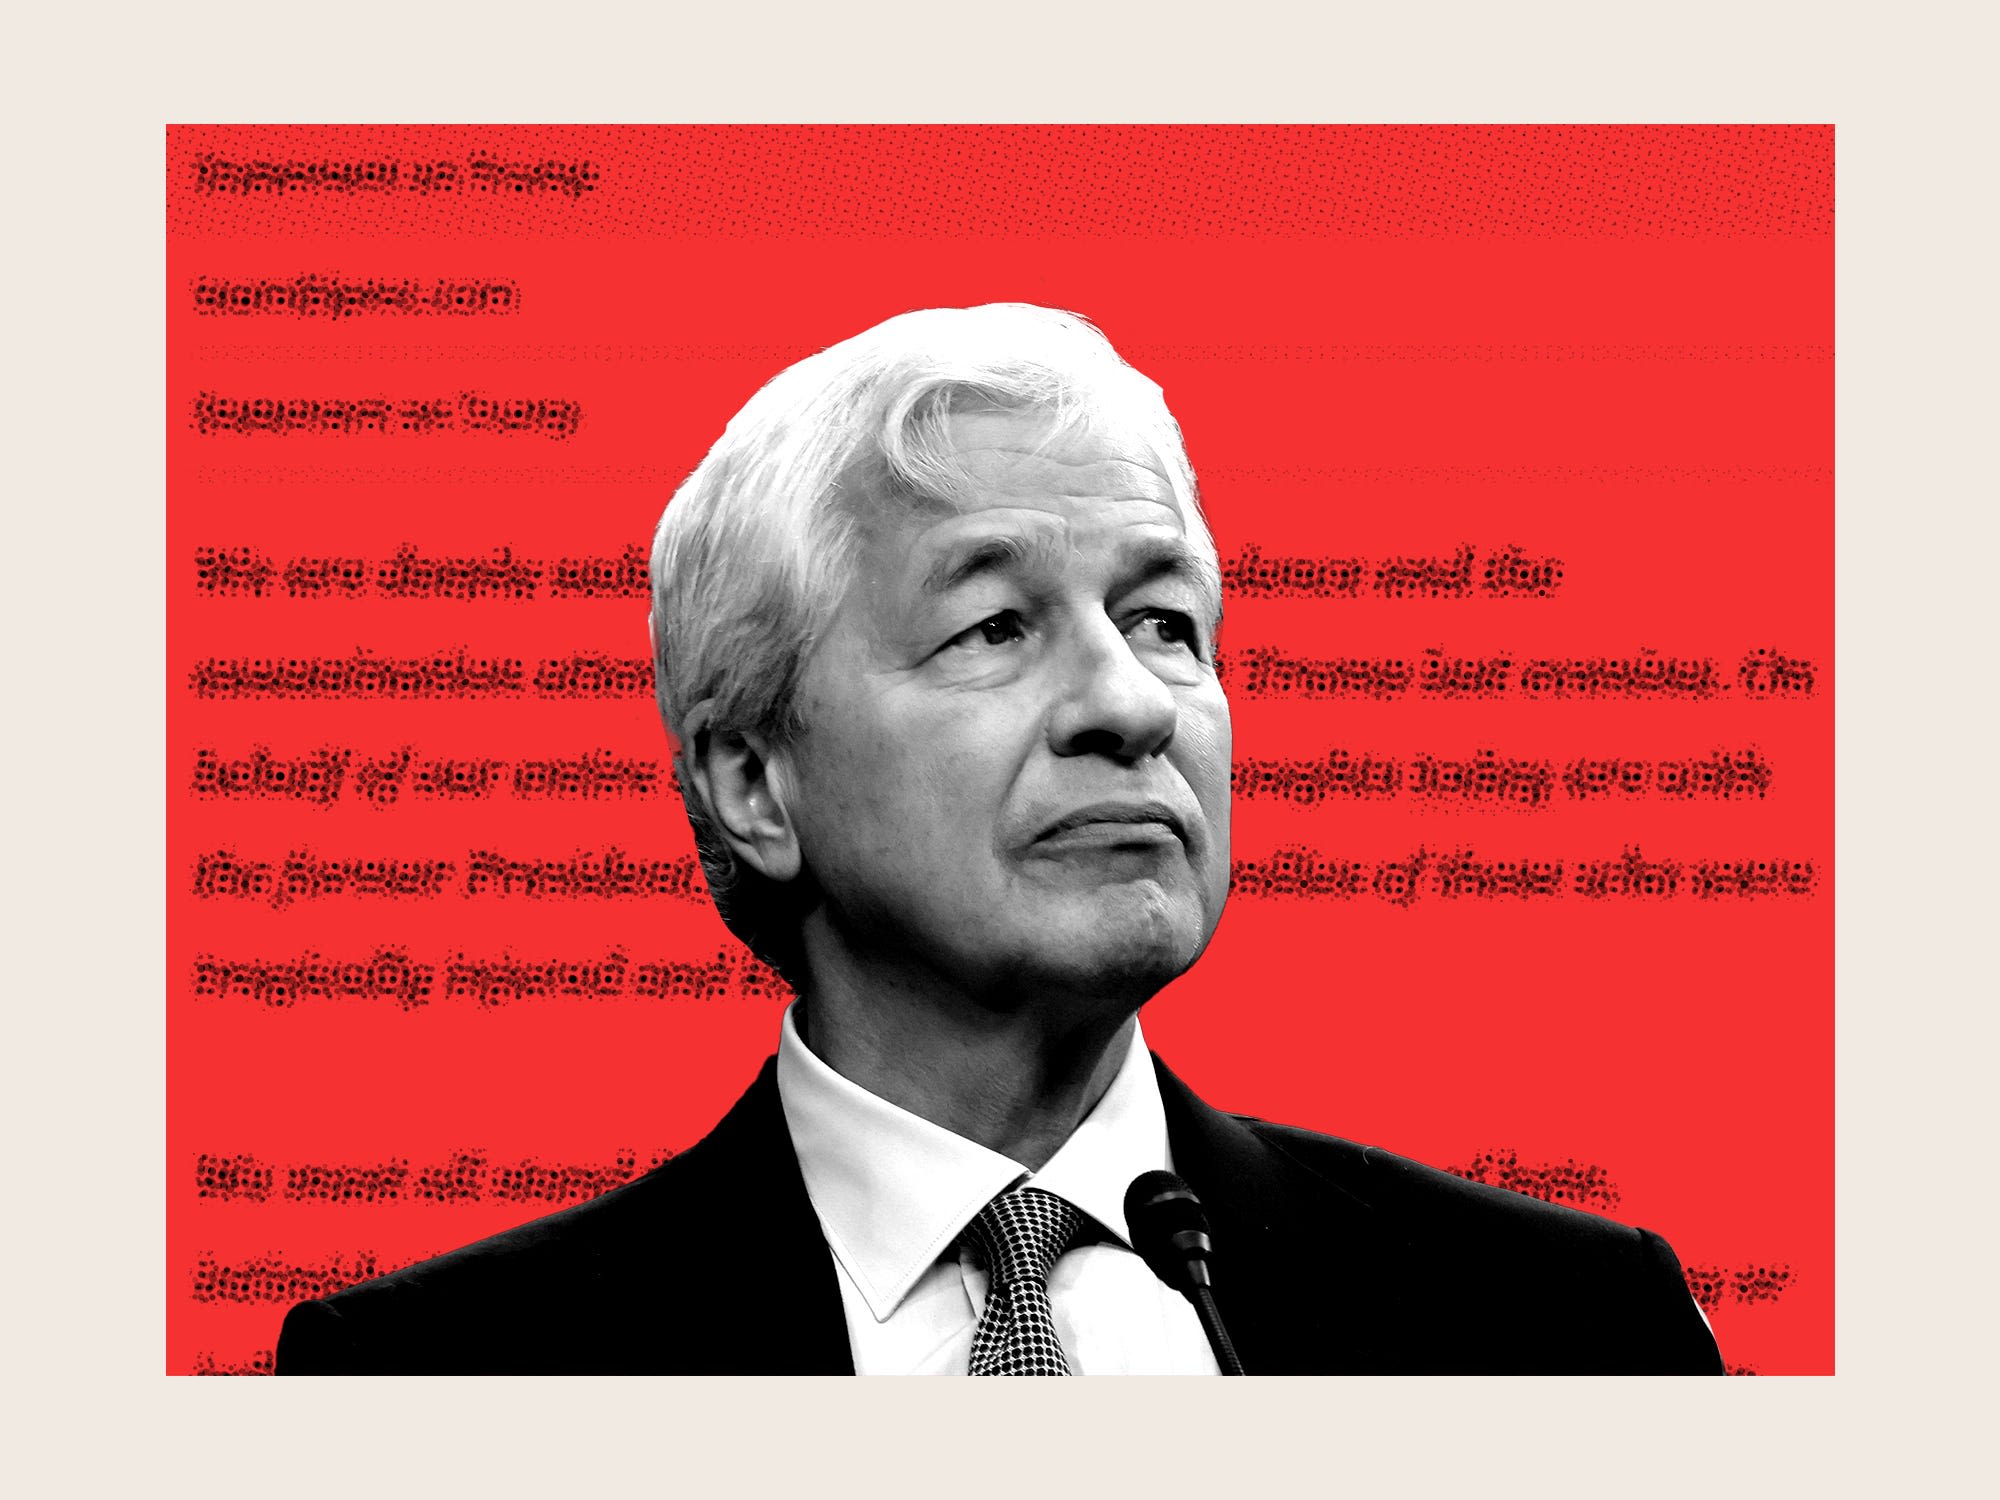 Read the email CEO Jamie Dimon sent to JPMorgan employees after the assassination attempt on Trump